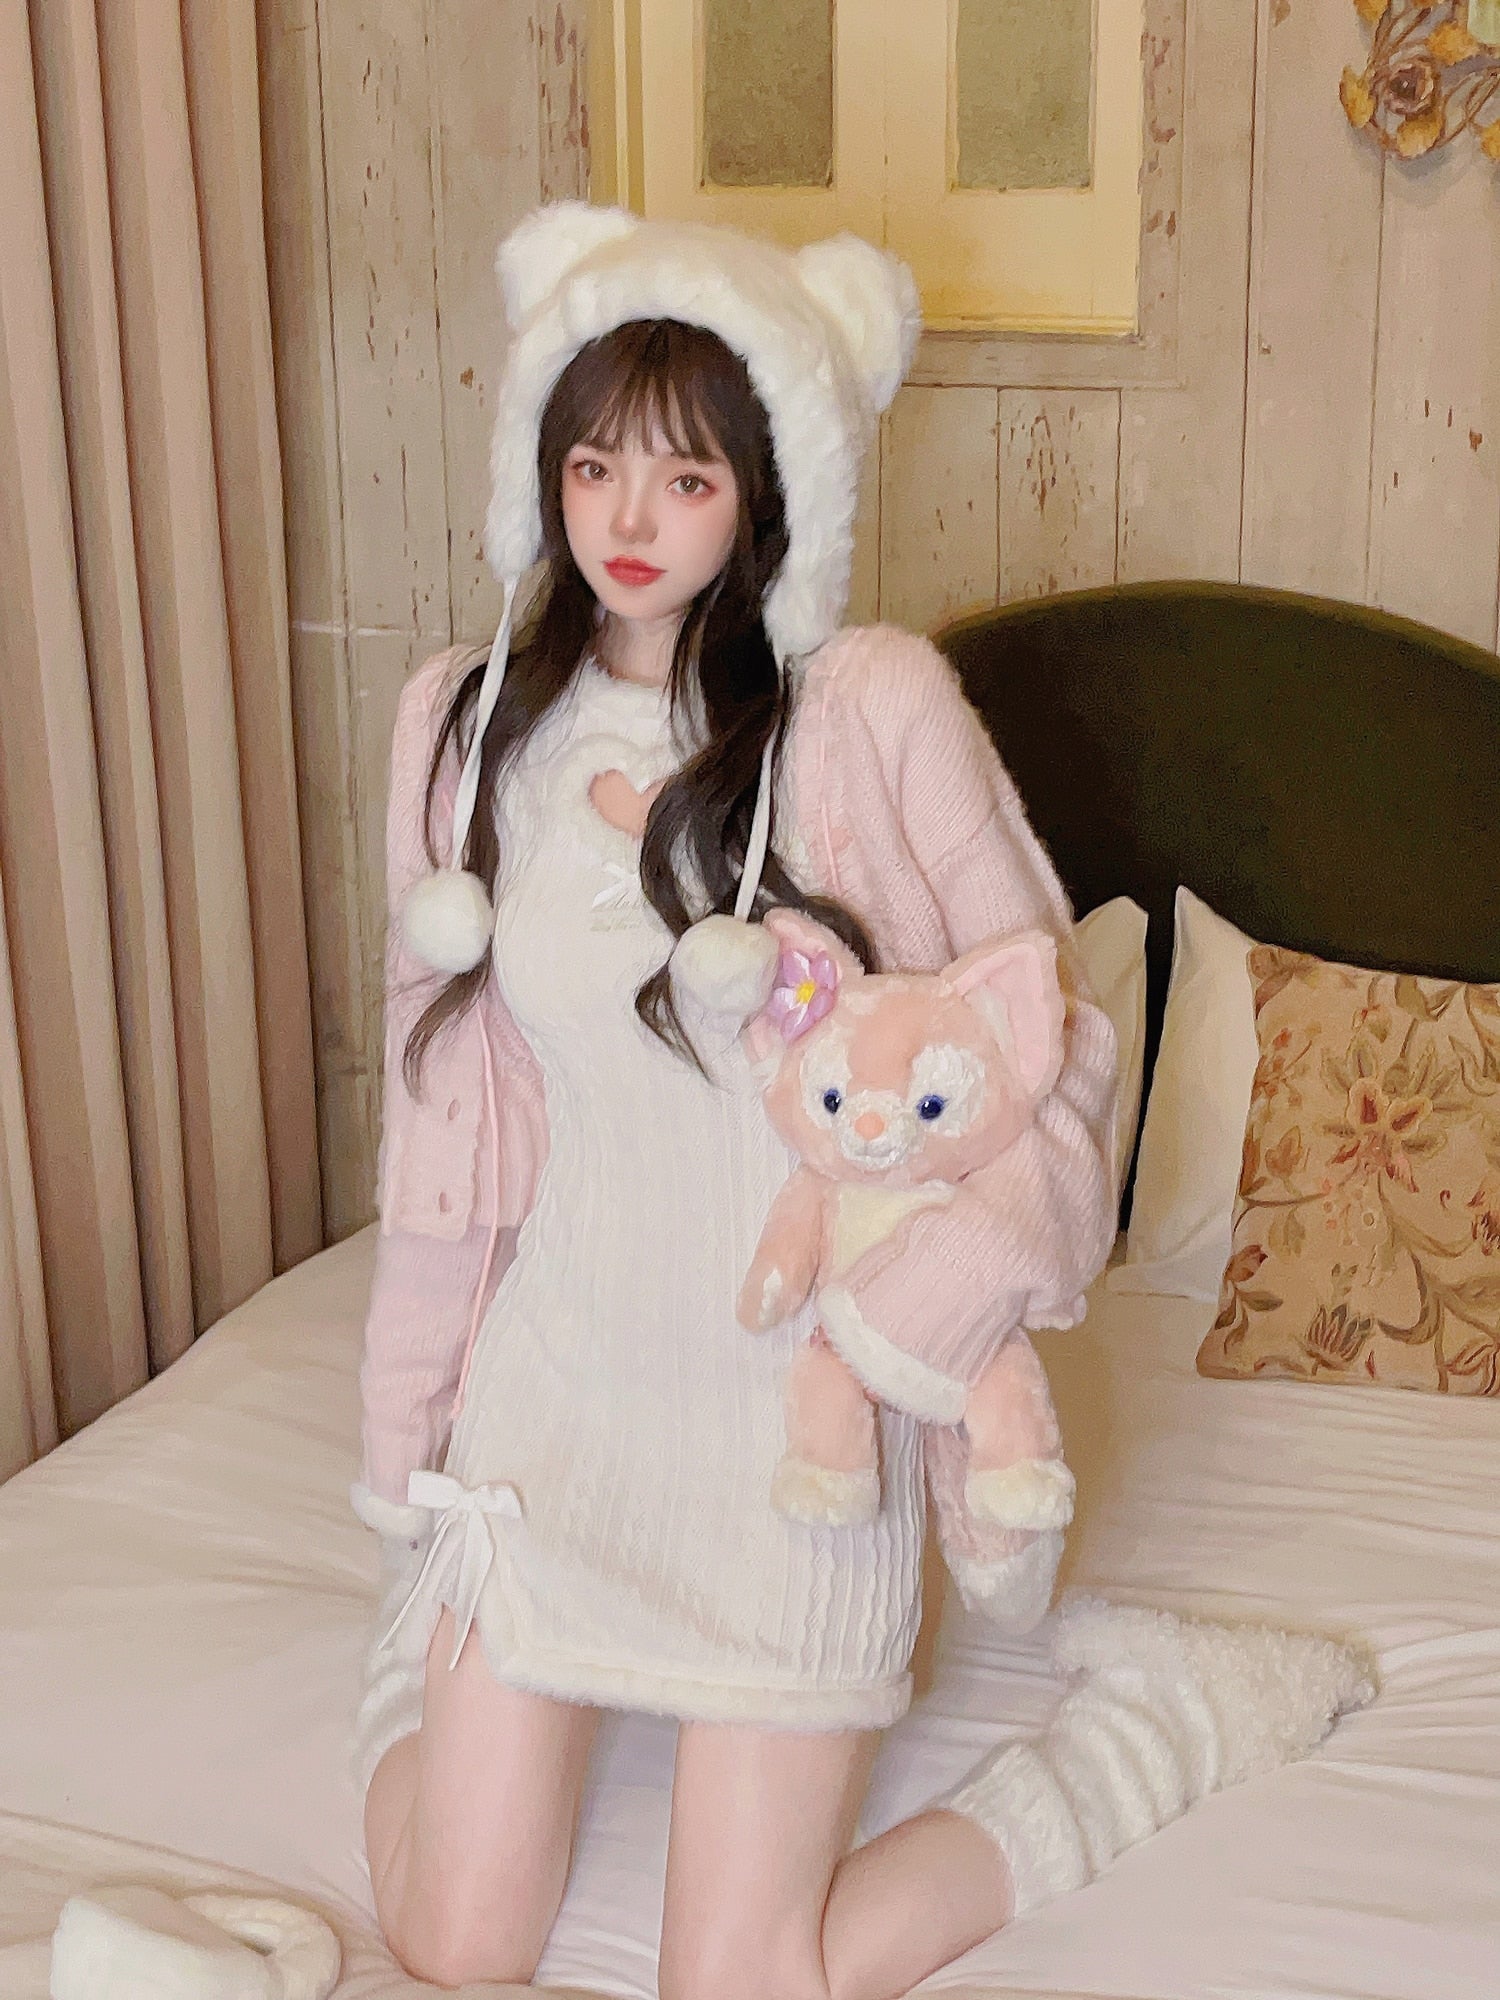 Lace Fungus Lace Embroidery Doll Dress Women's Dresses Japanese Harajuku  Ulzzang Female Korean Kawaii Cute Clothing For Women - Price history &  Review | AliExpress Seller - Nothomme Store | Alitools.io